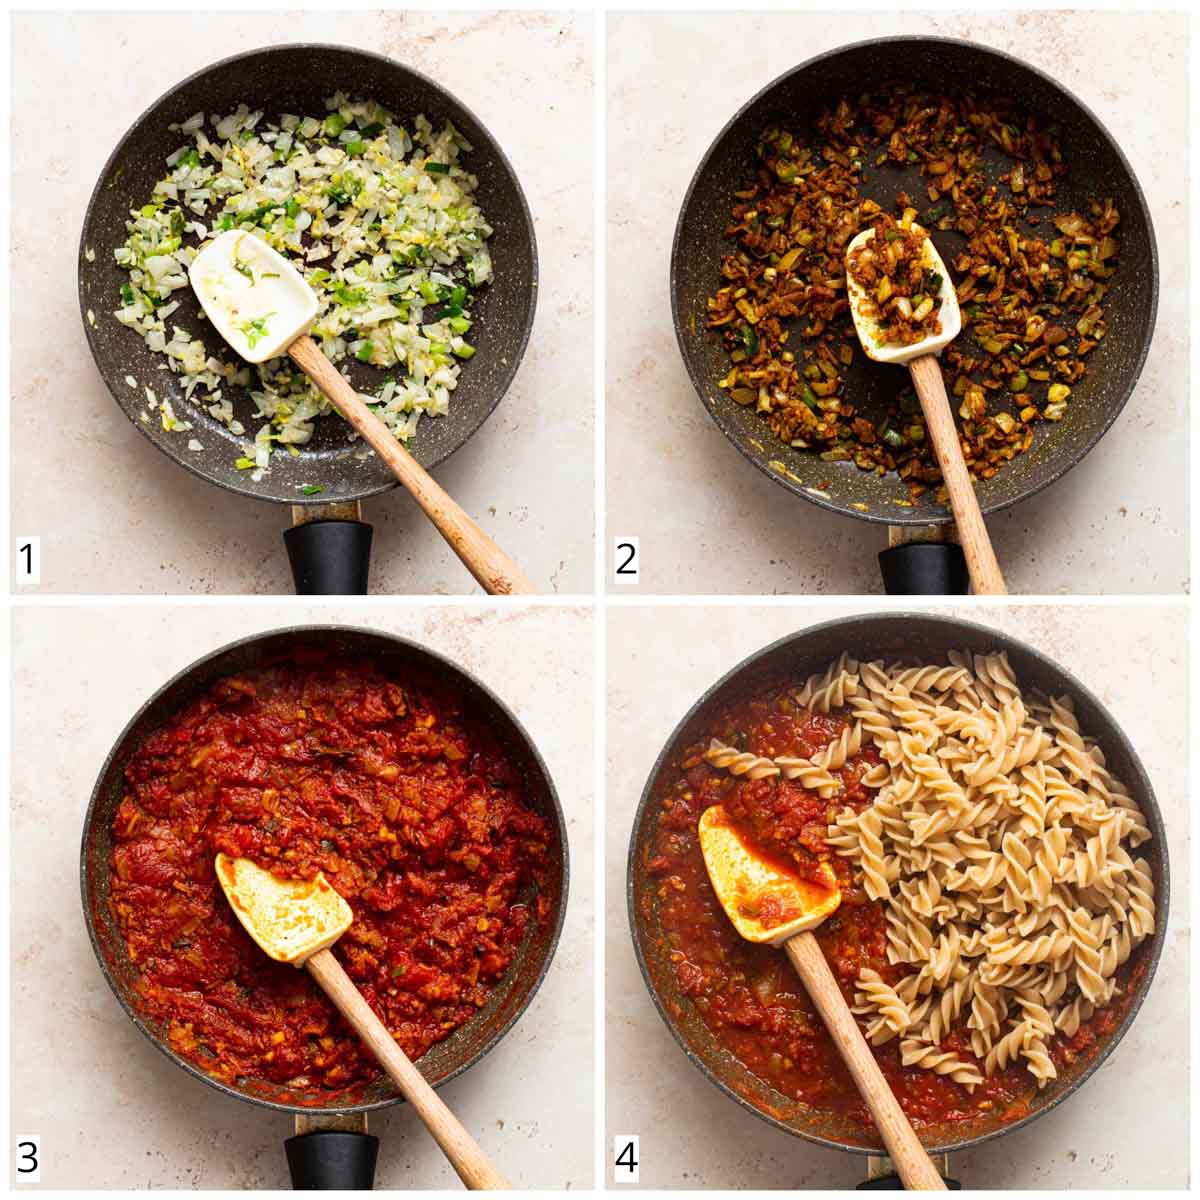 A collage of four images showing the steps in making pasta sauce.